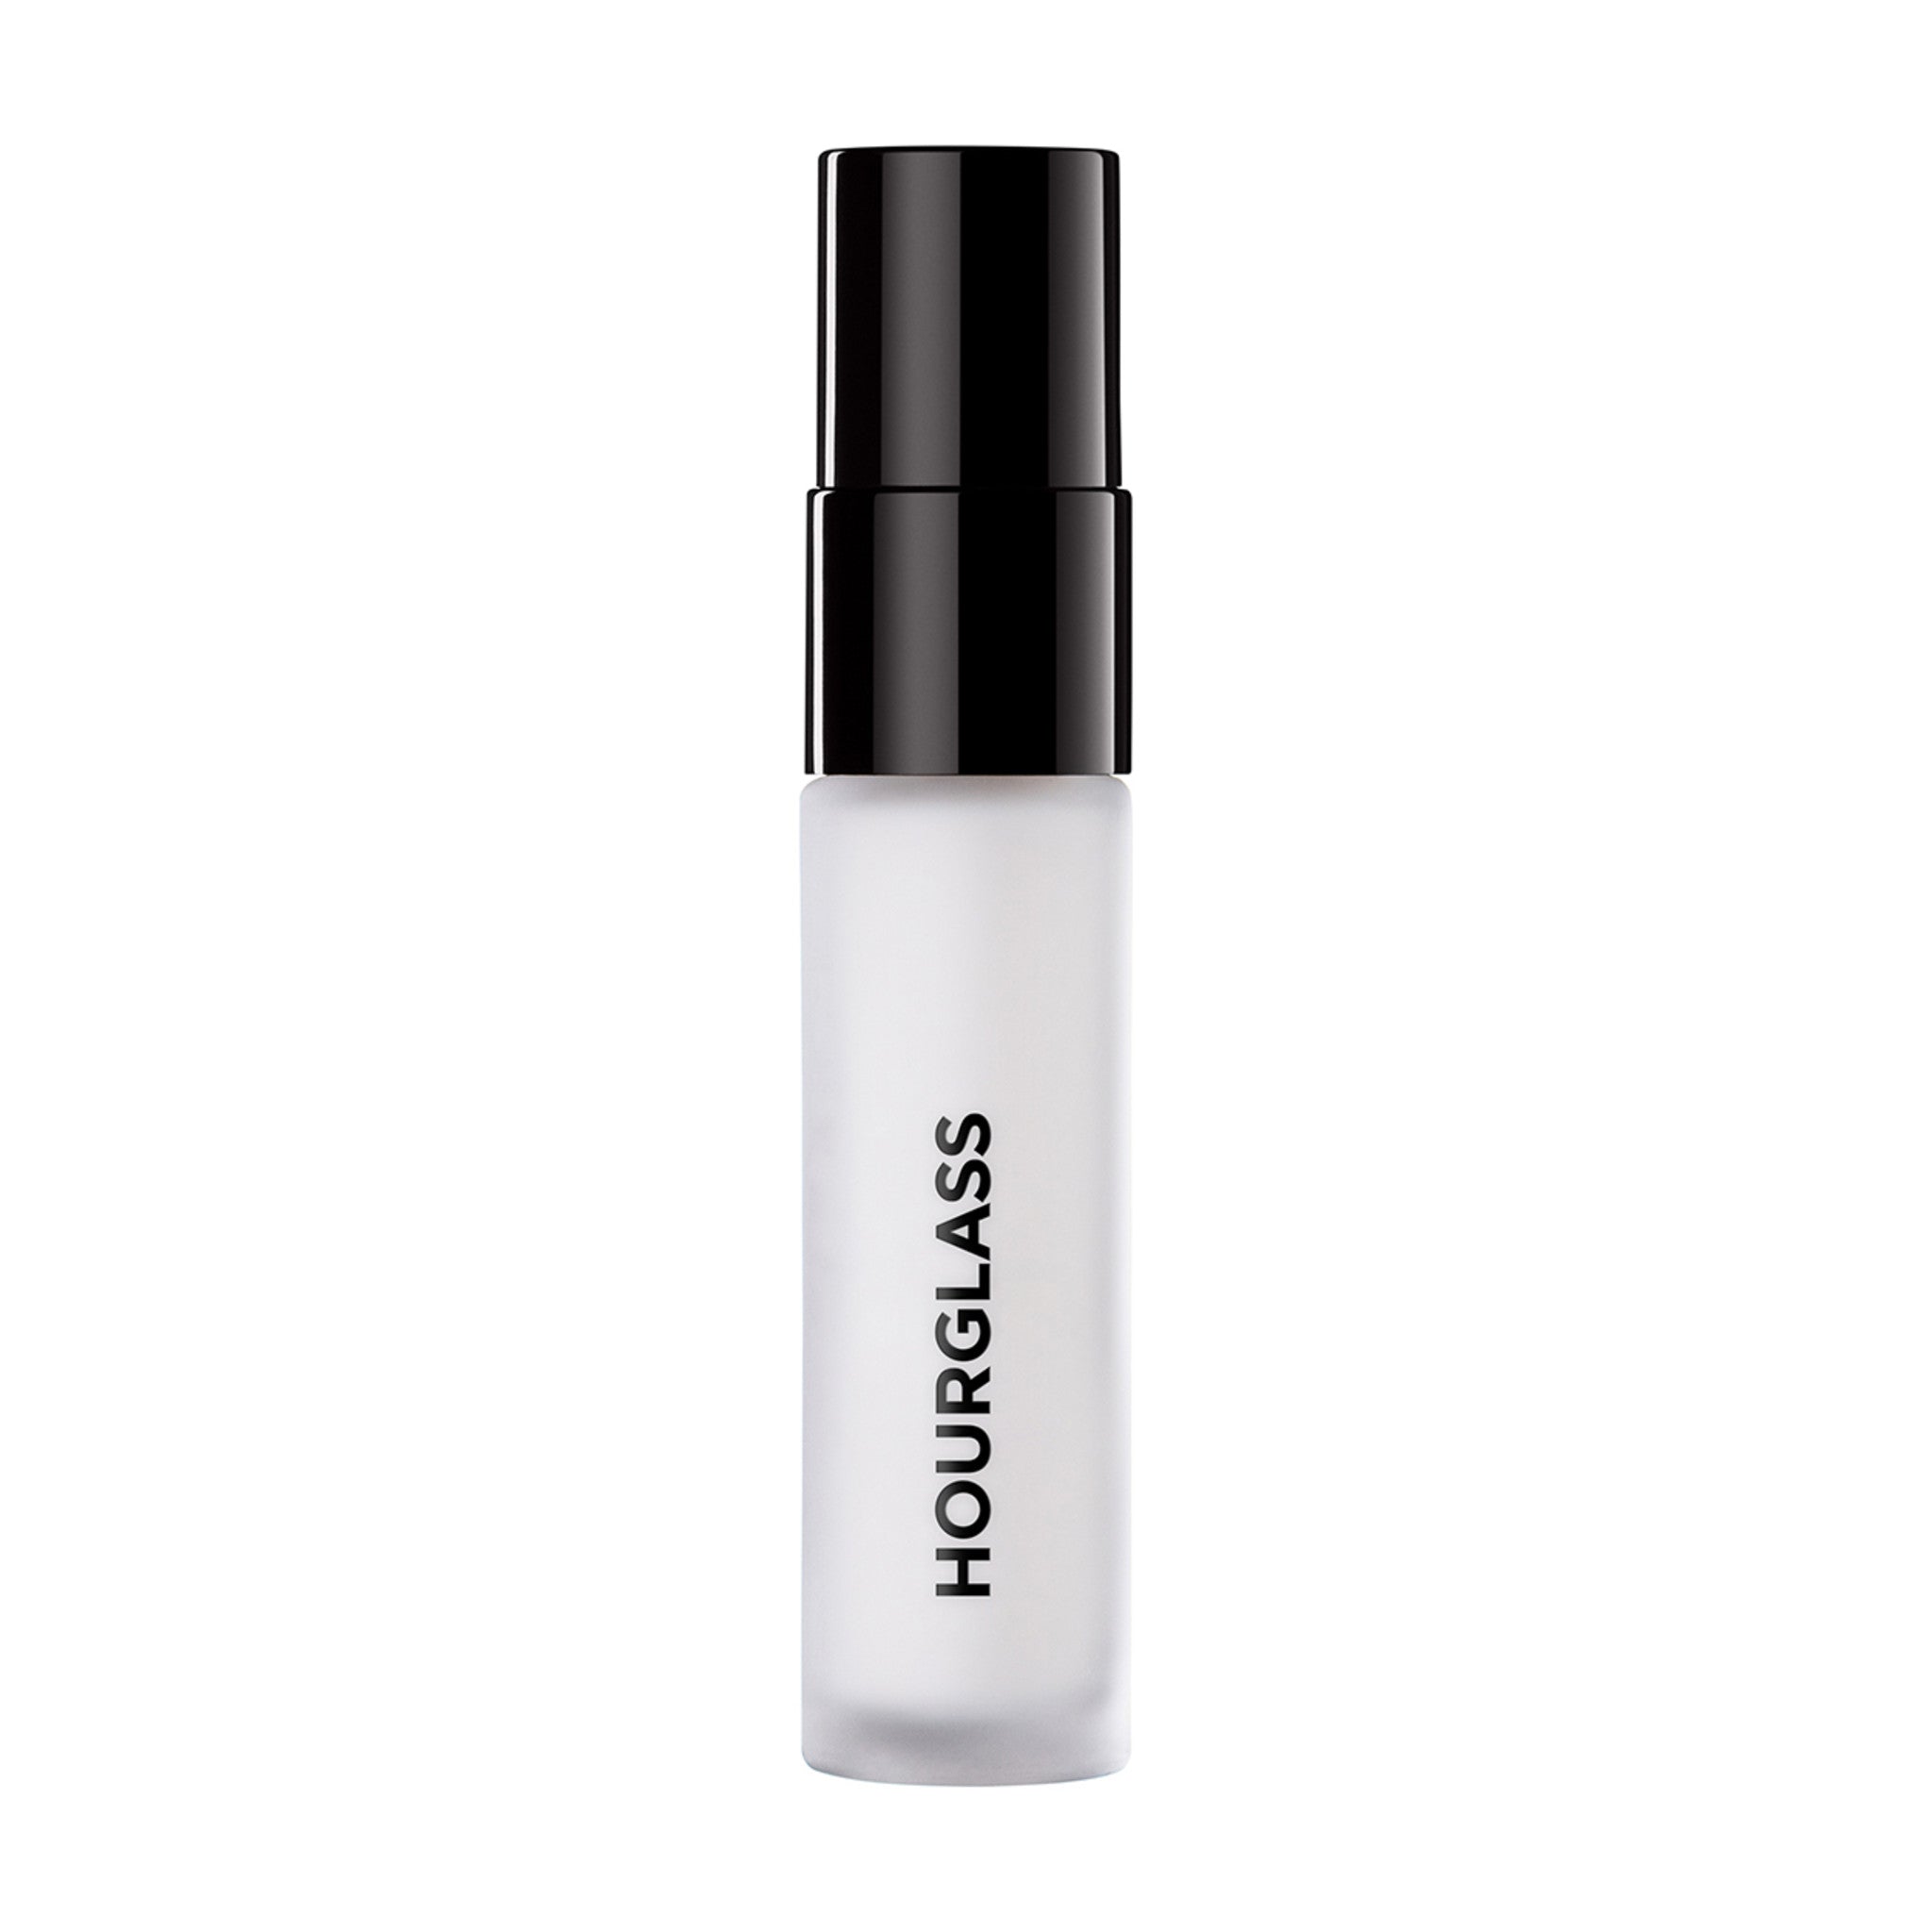 Hourglass Veil Mineral Primer Size variant: 10 ml main image. This product is for deep complexions